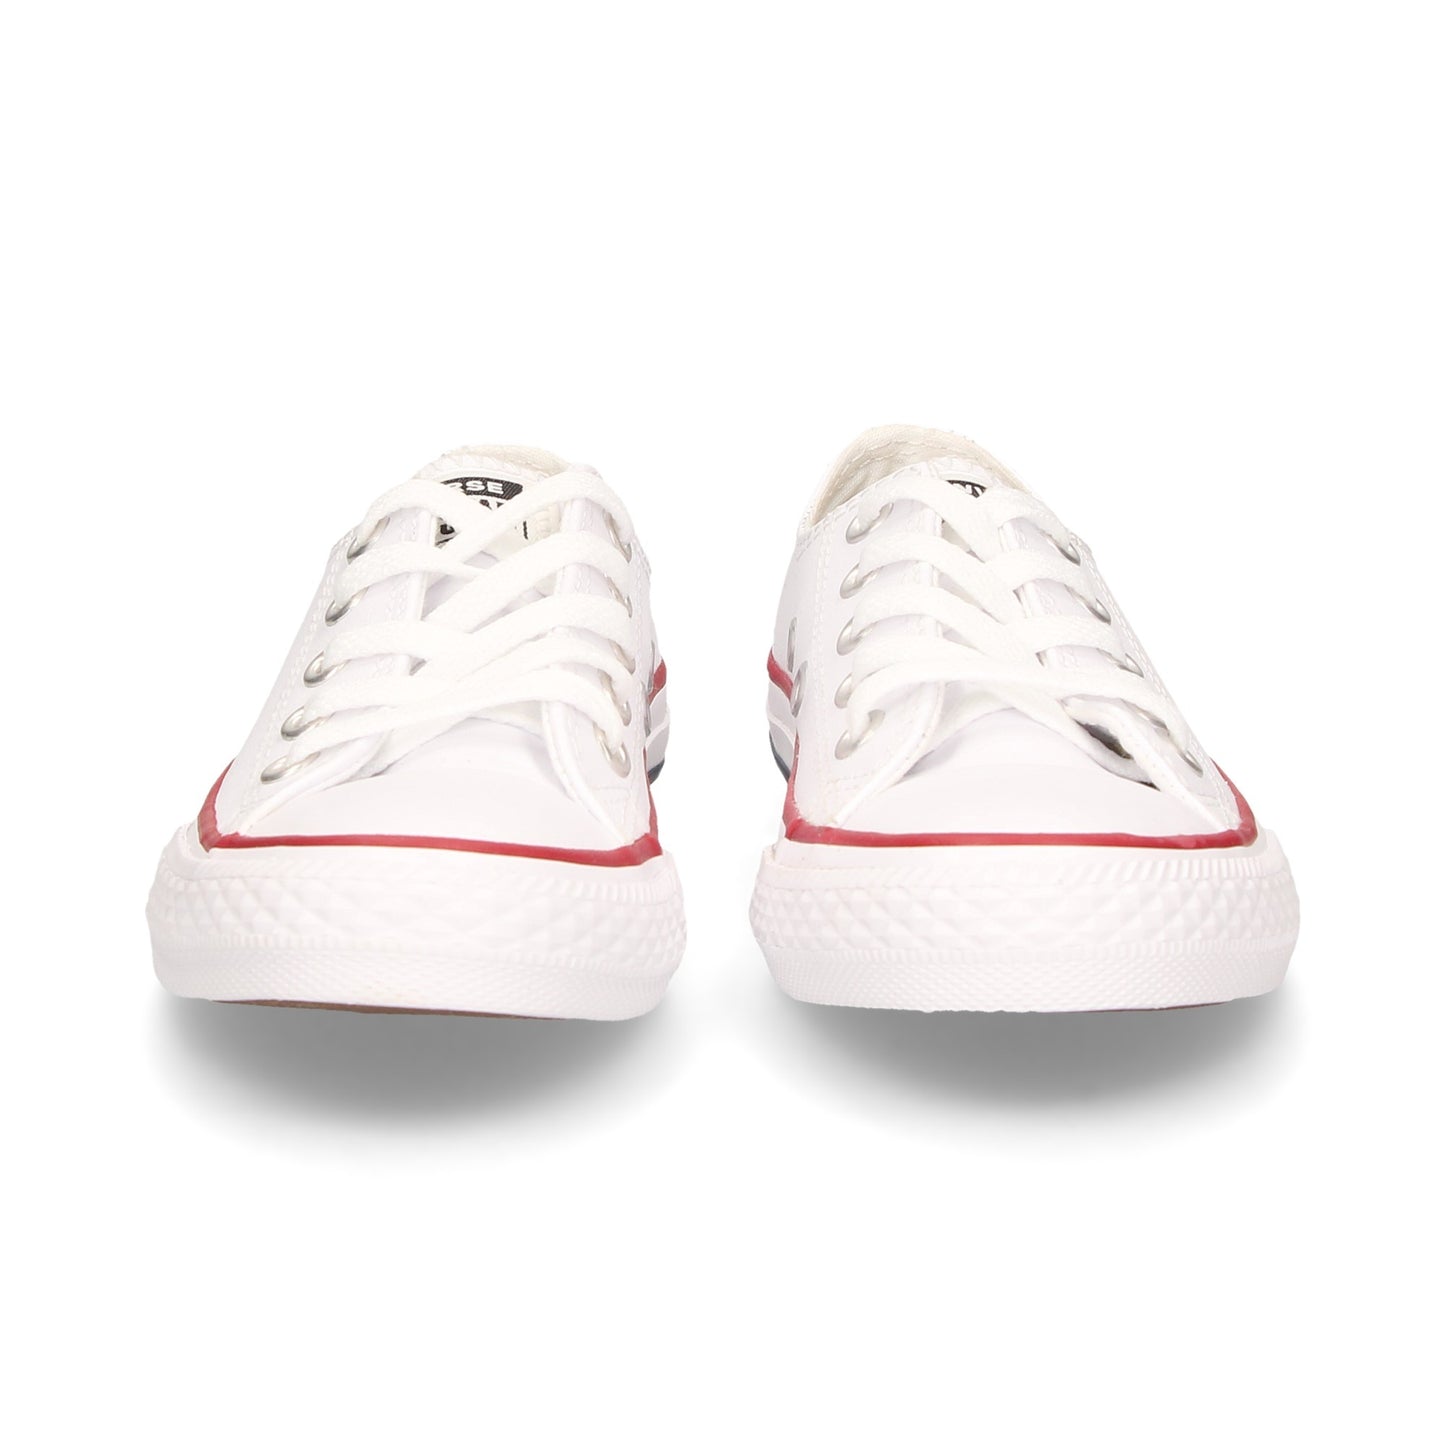 + Converse Chuck Taylor Youth All Star Low Leather - (335892C) - WHT LTH LO - R1L1